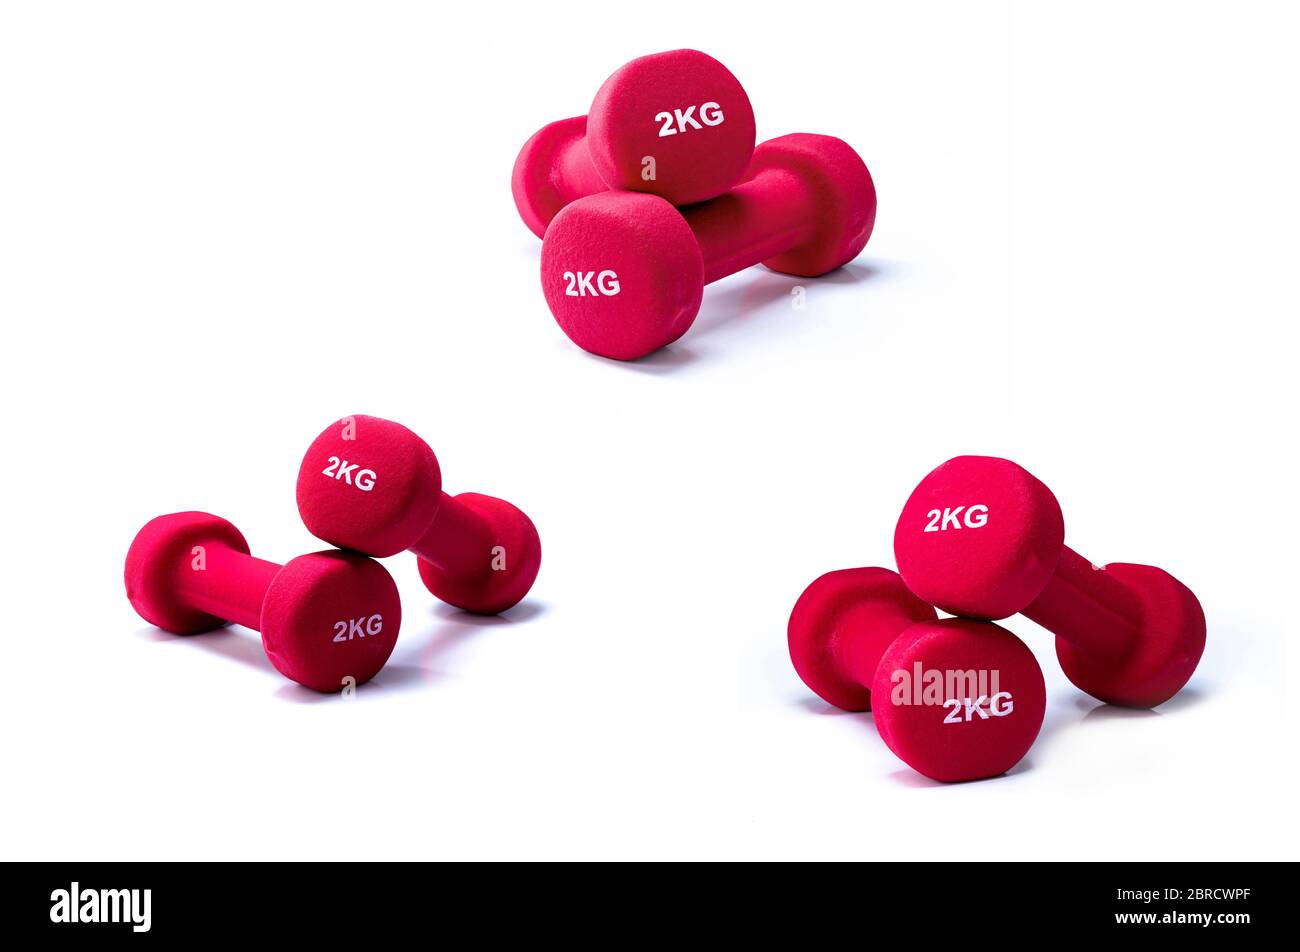 Set of red dumbbells isolated on white background. 3 pairs of red neoprene dumbbells. Home gym equipment for exercise at home. Weight training Stock Photo